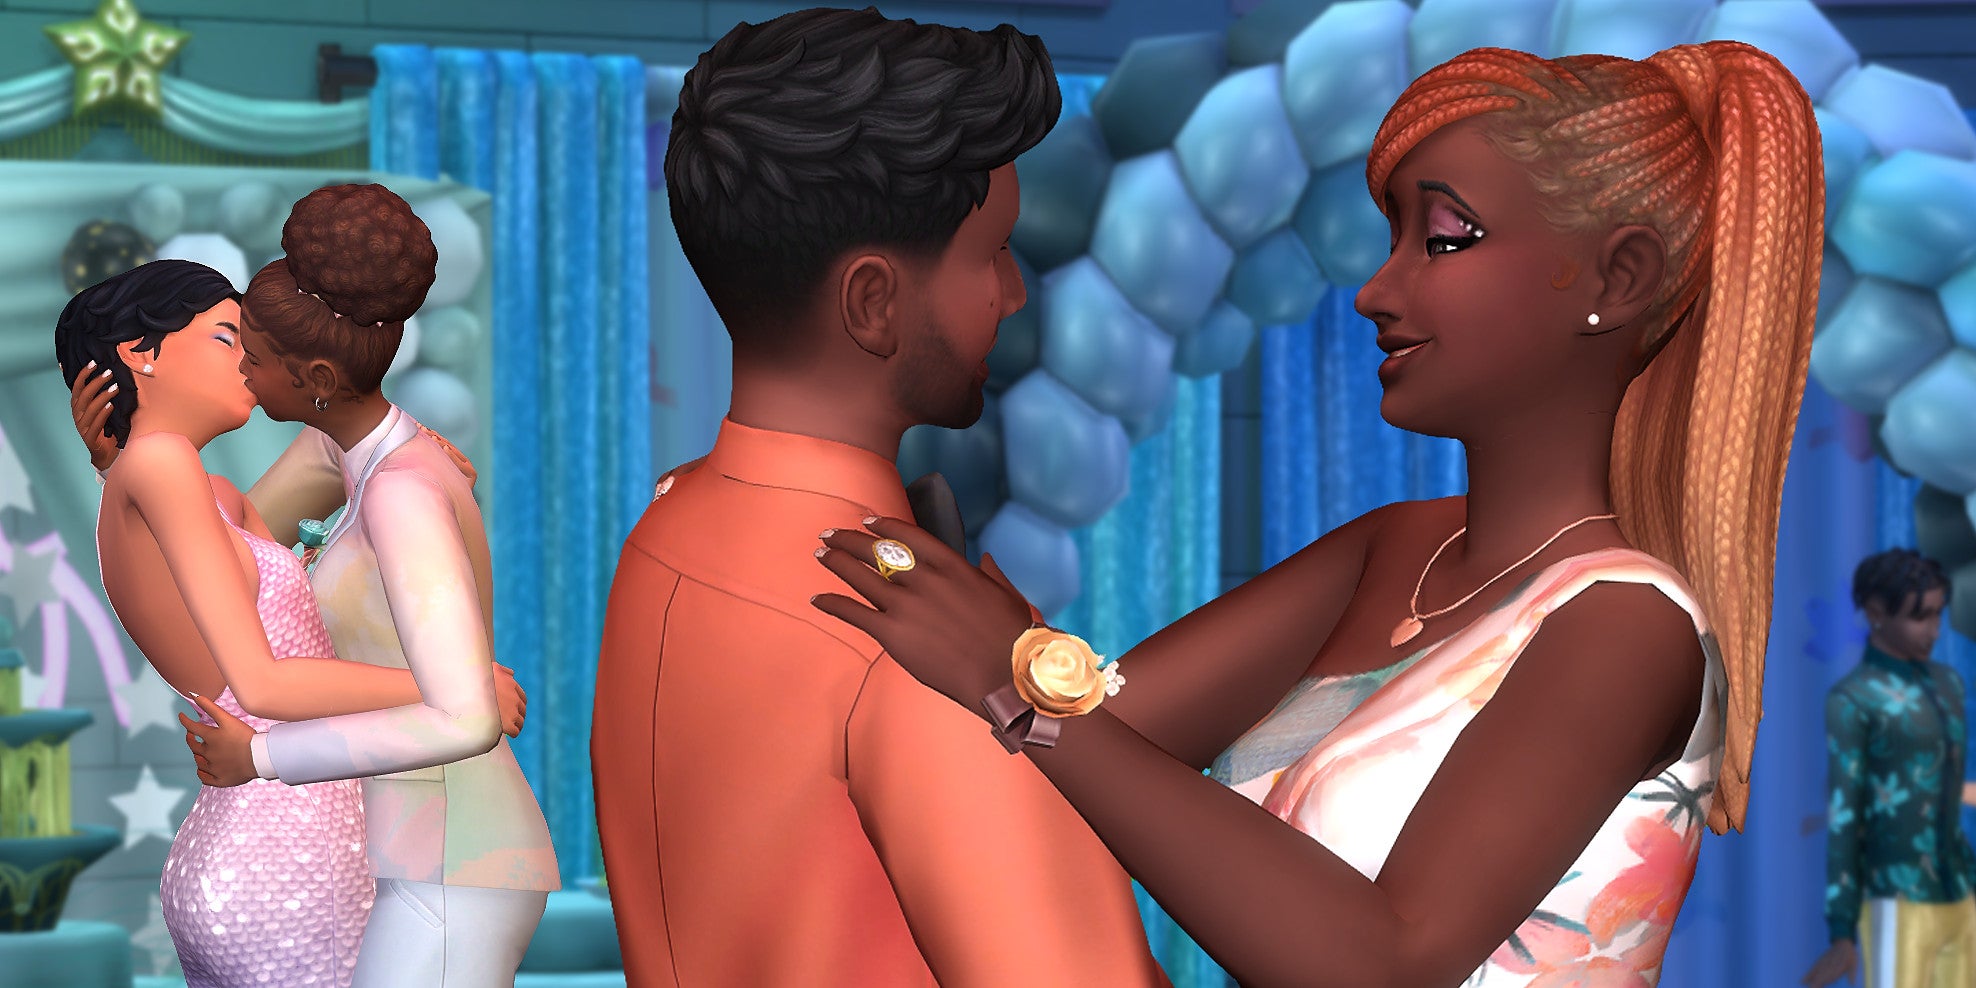 Sims dance at a prom in The Sims 4.